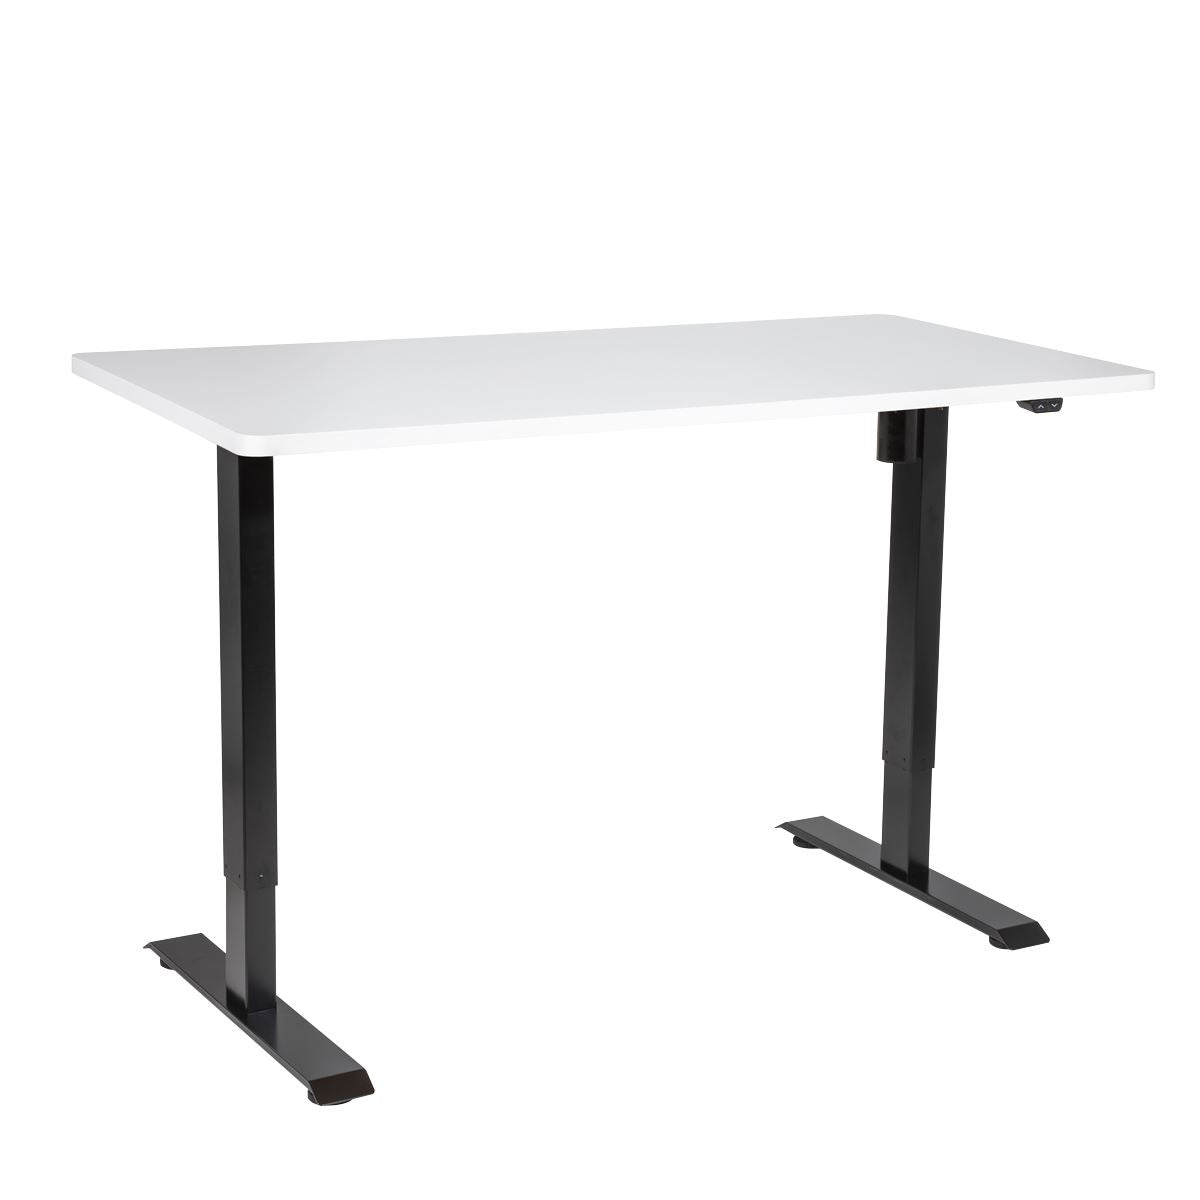 Dellonda White Electric Height Adjustable Standing Desk, Quiet, Home Office, 1400x700mm